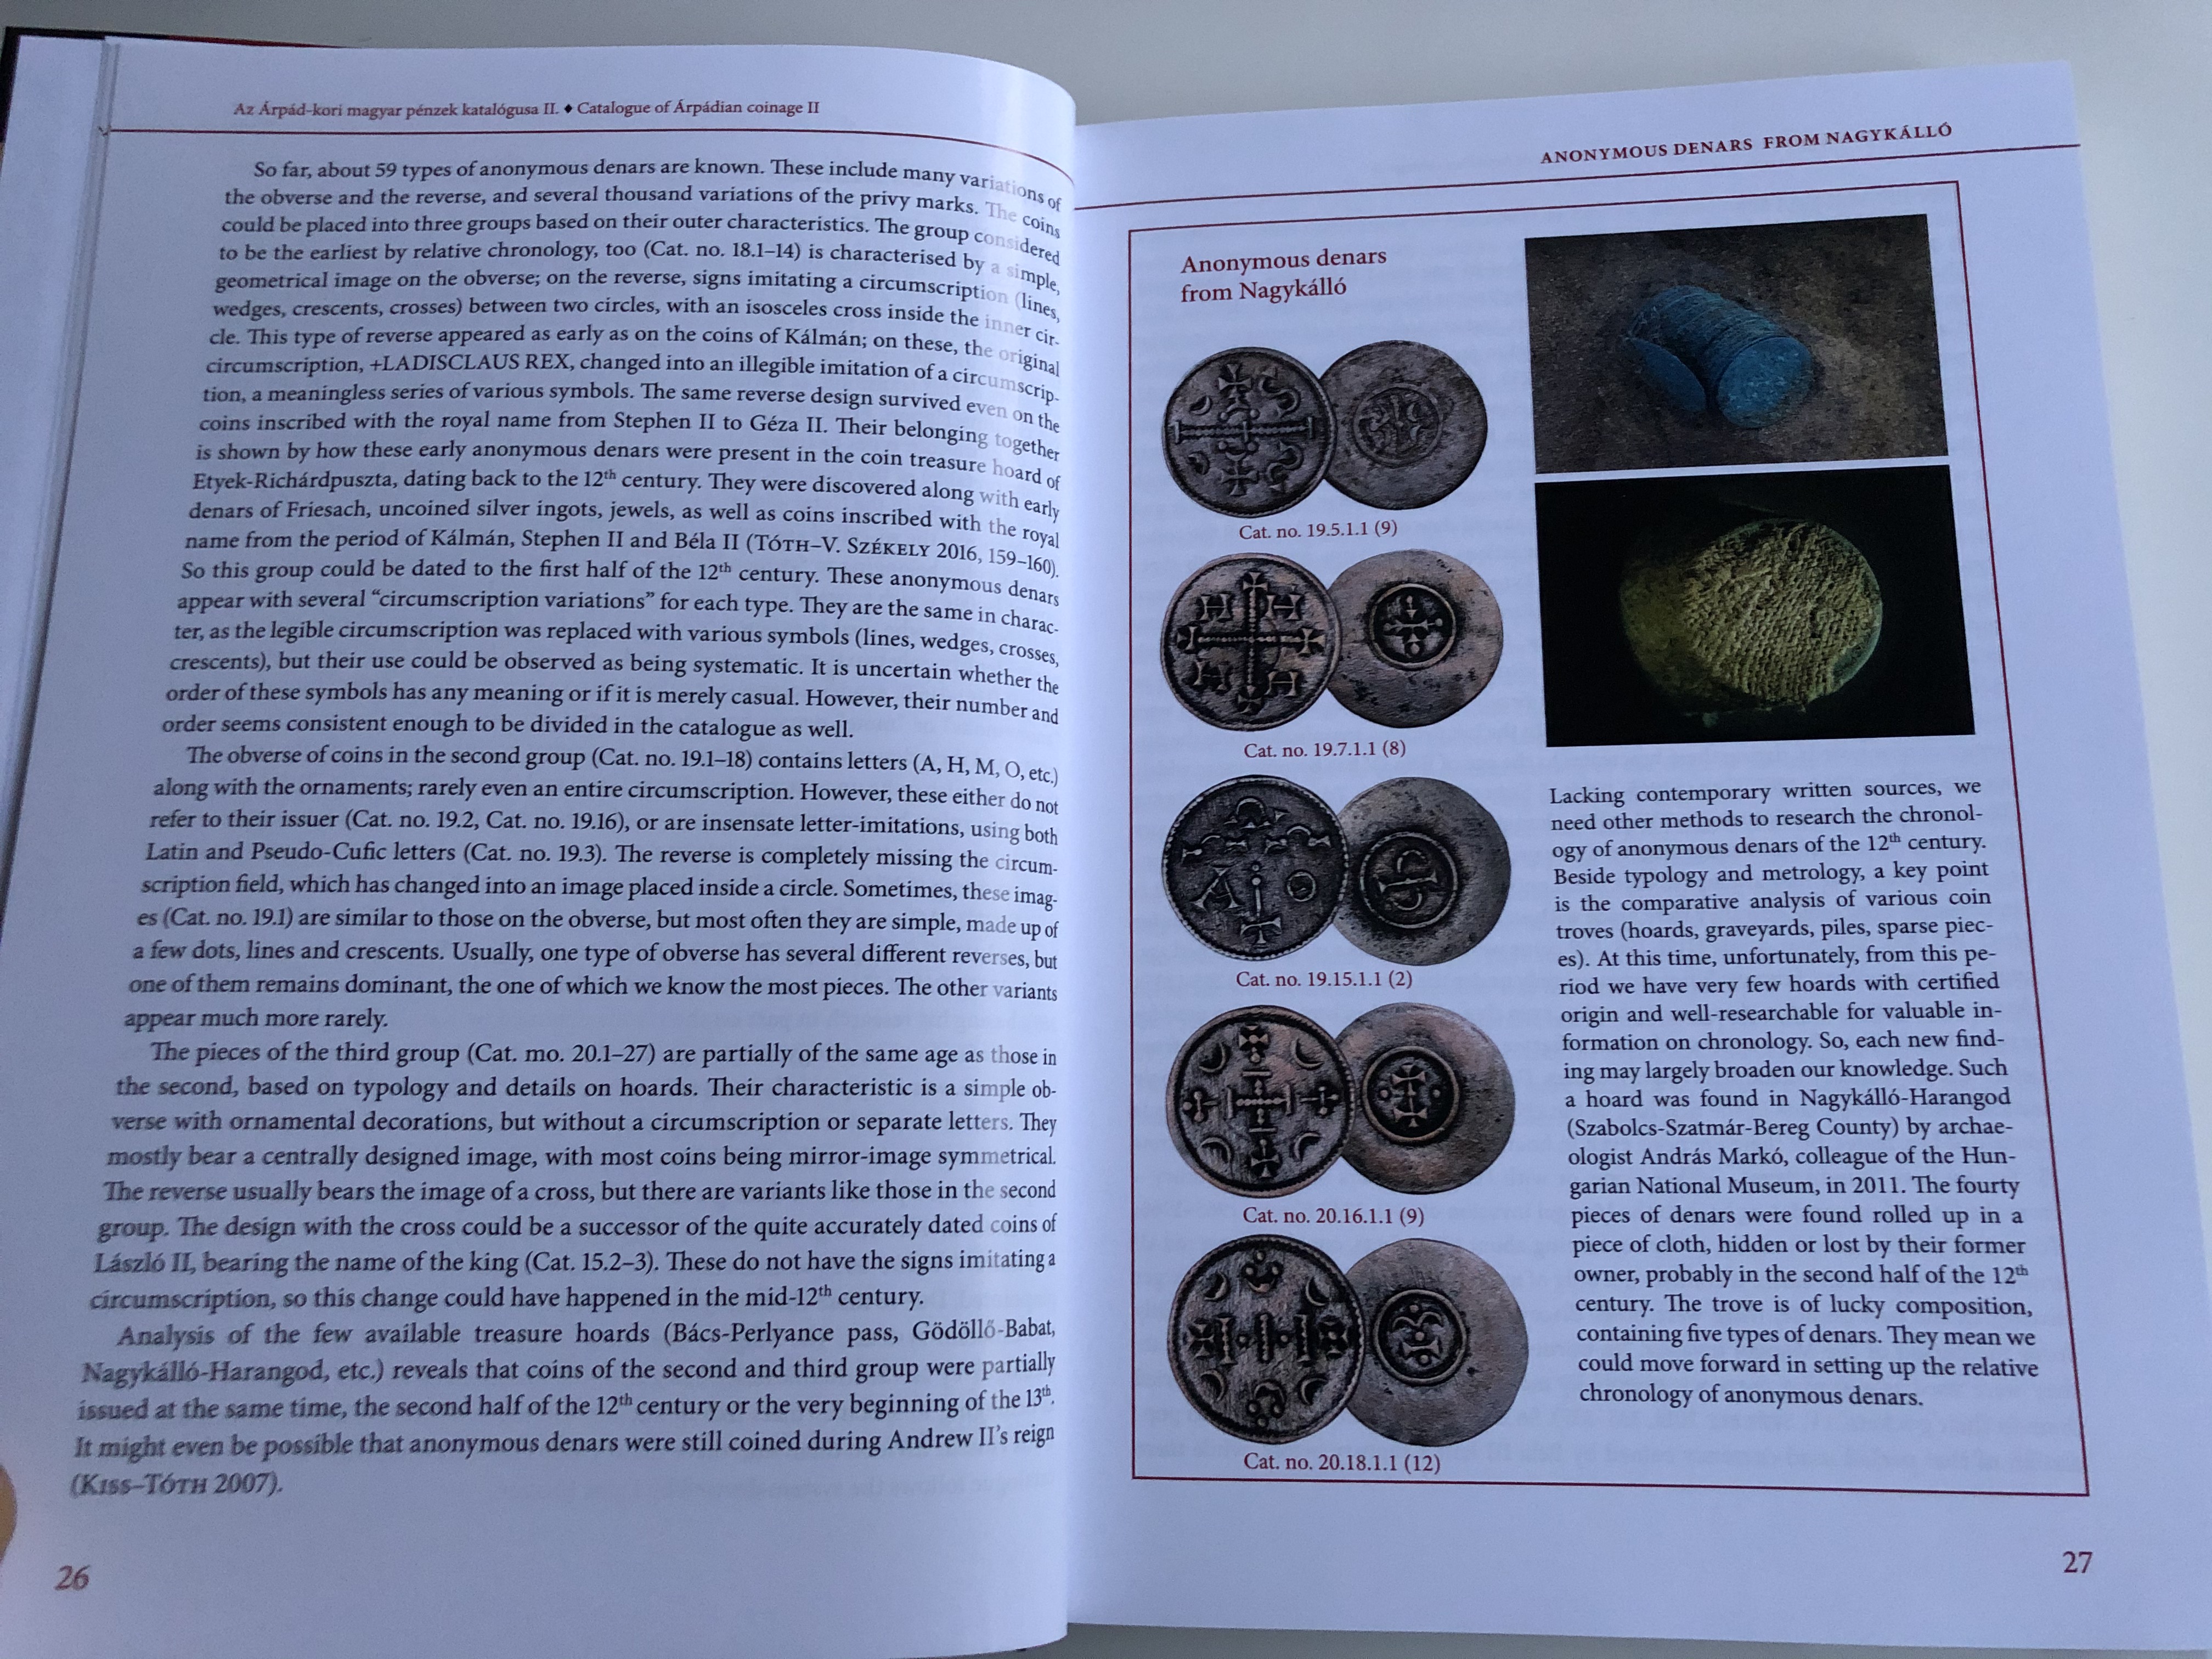 catalogue-of-rp-dian-coinage-ii.-by-t-th-csaba-kiss-j-zsef-g-za-9.jpg